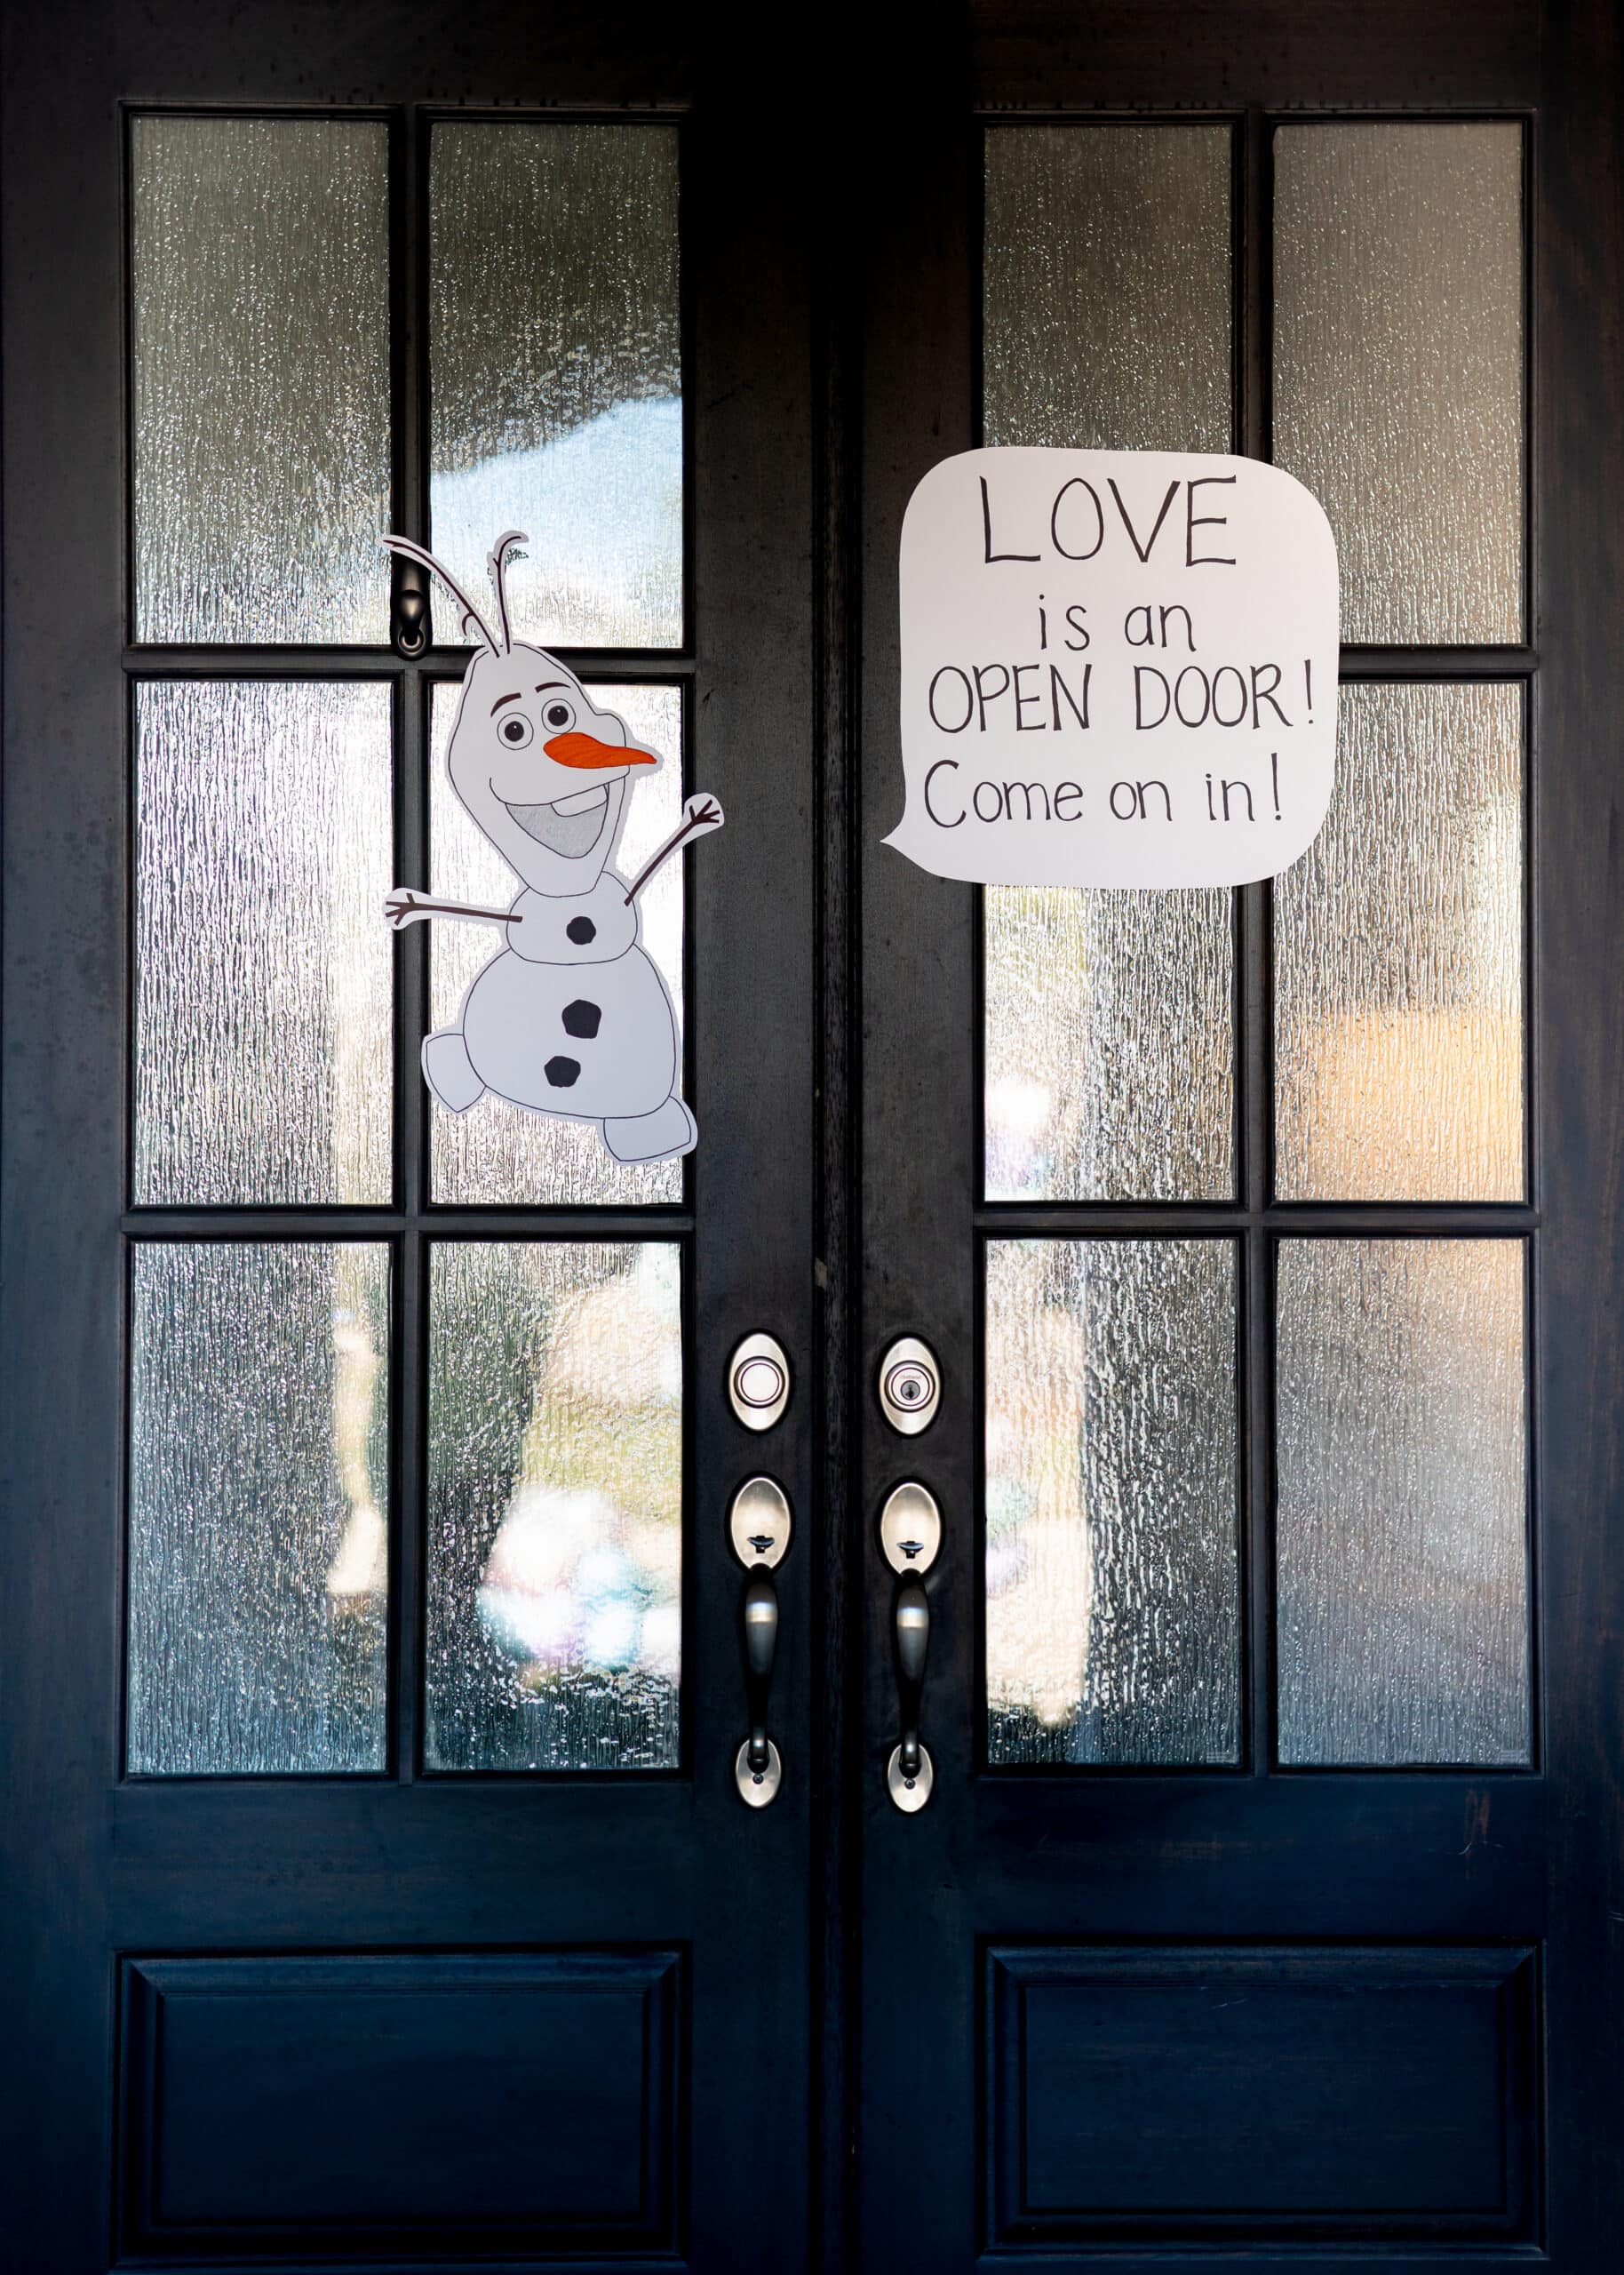 Olaf drawing on door with a sign that says Love is an open door